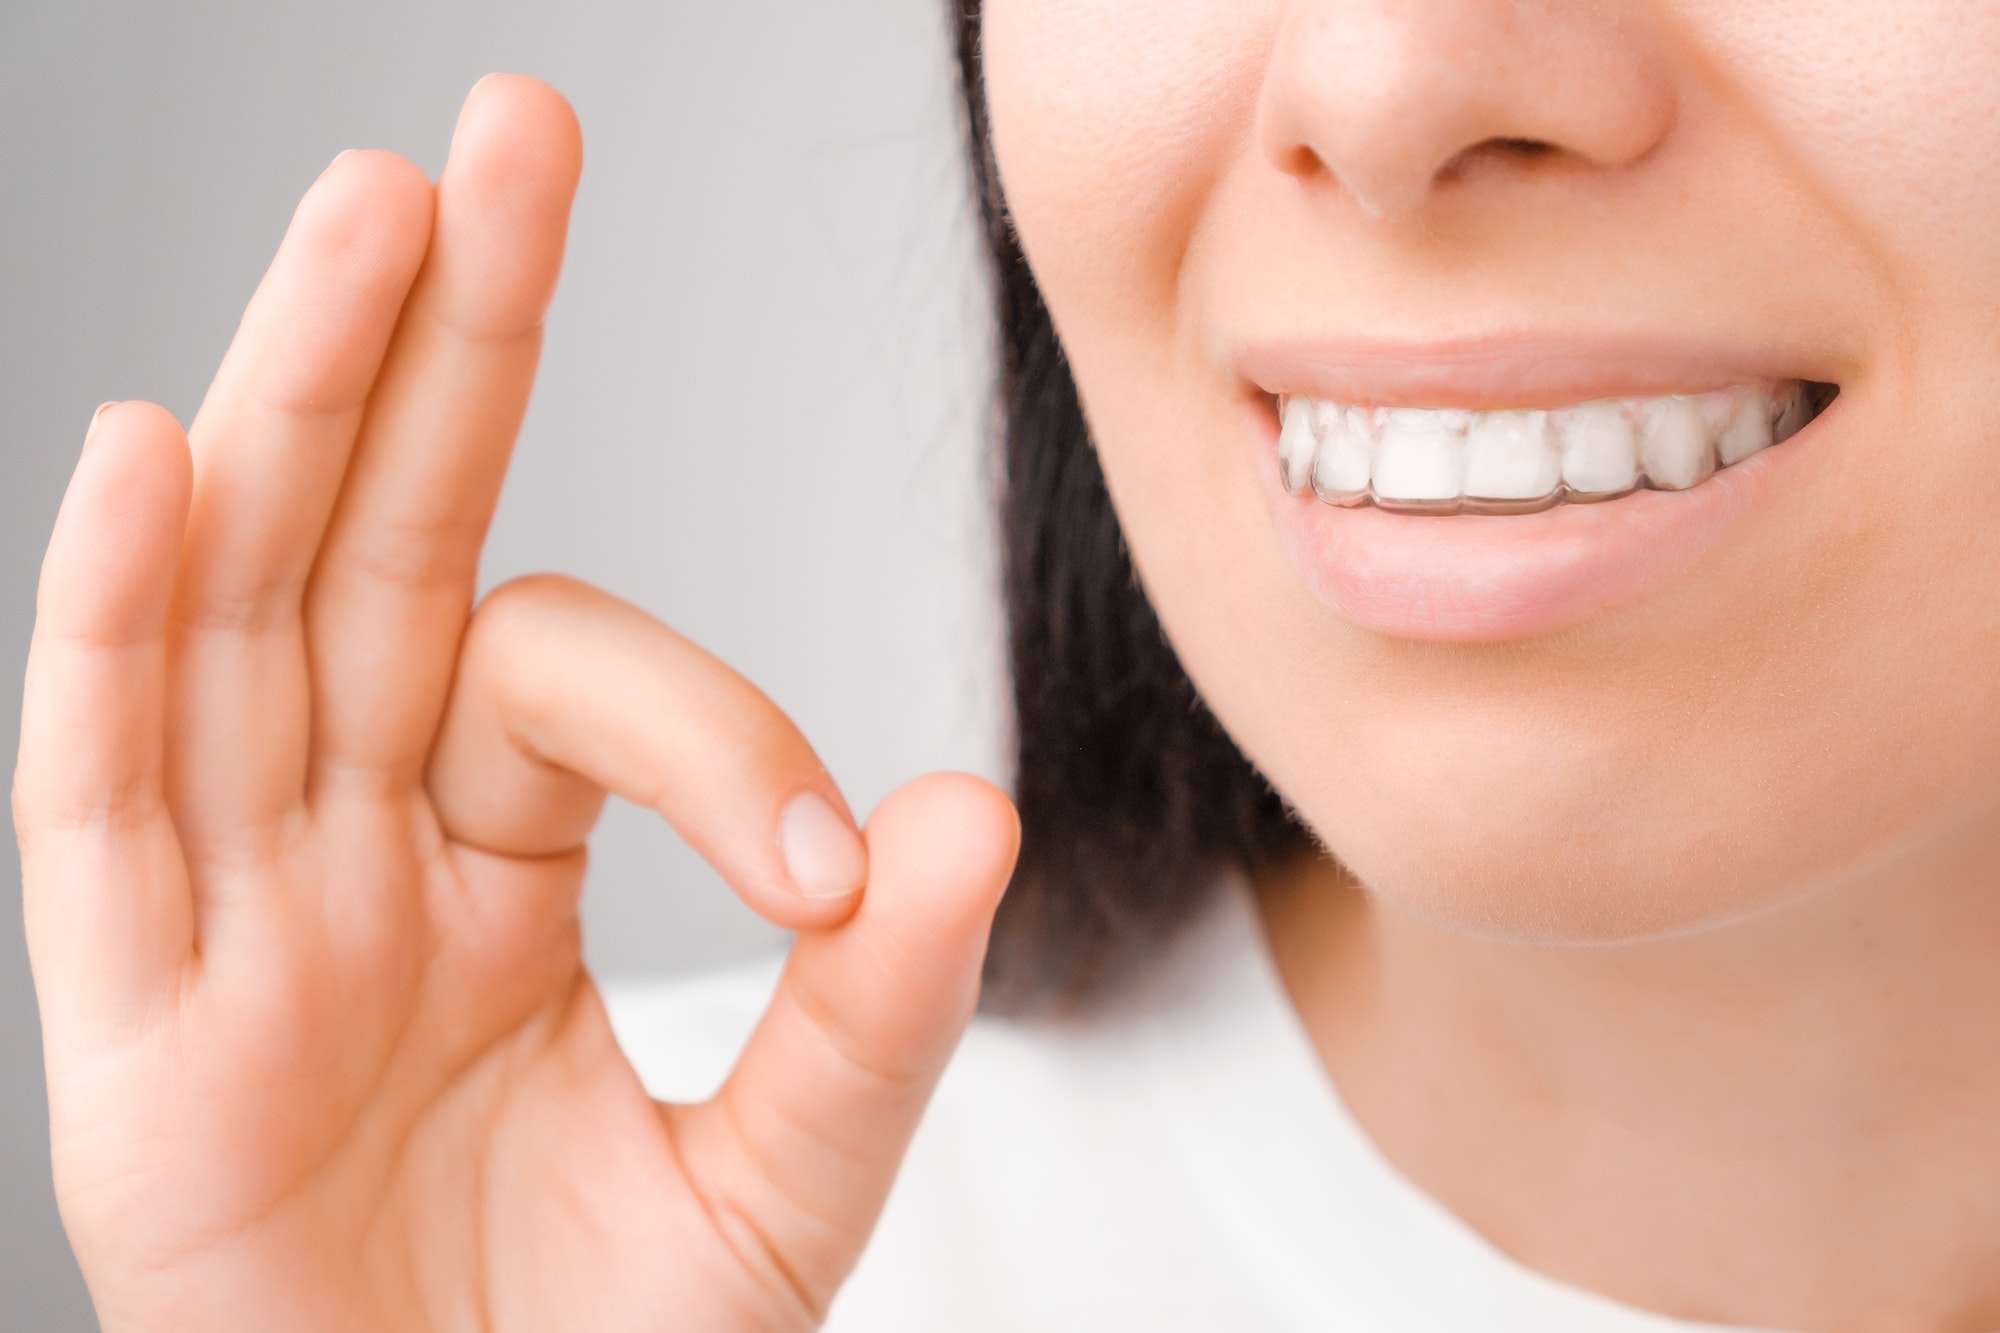 Happy woman with a perfect smile in transparent aligners on her teeth shows sign OK. Removable